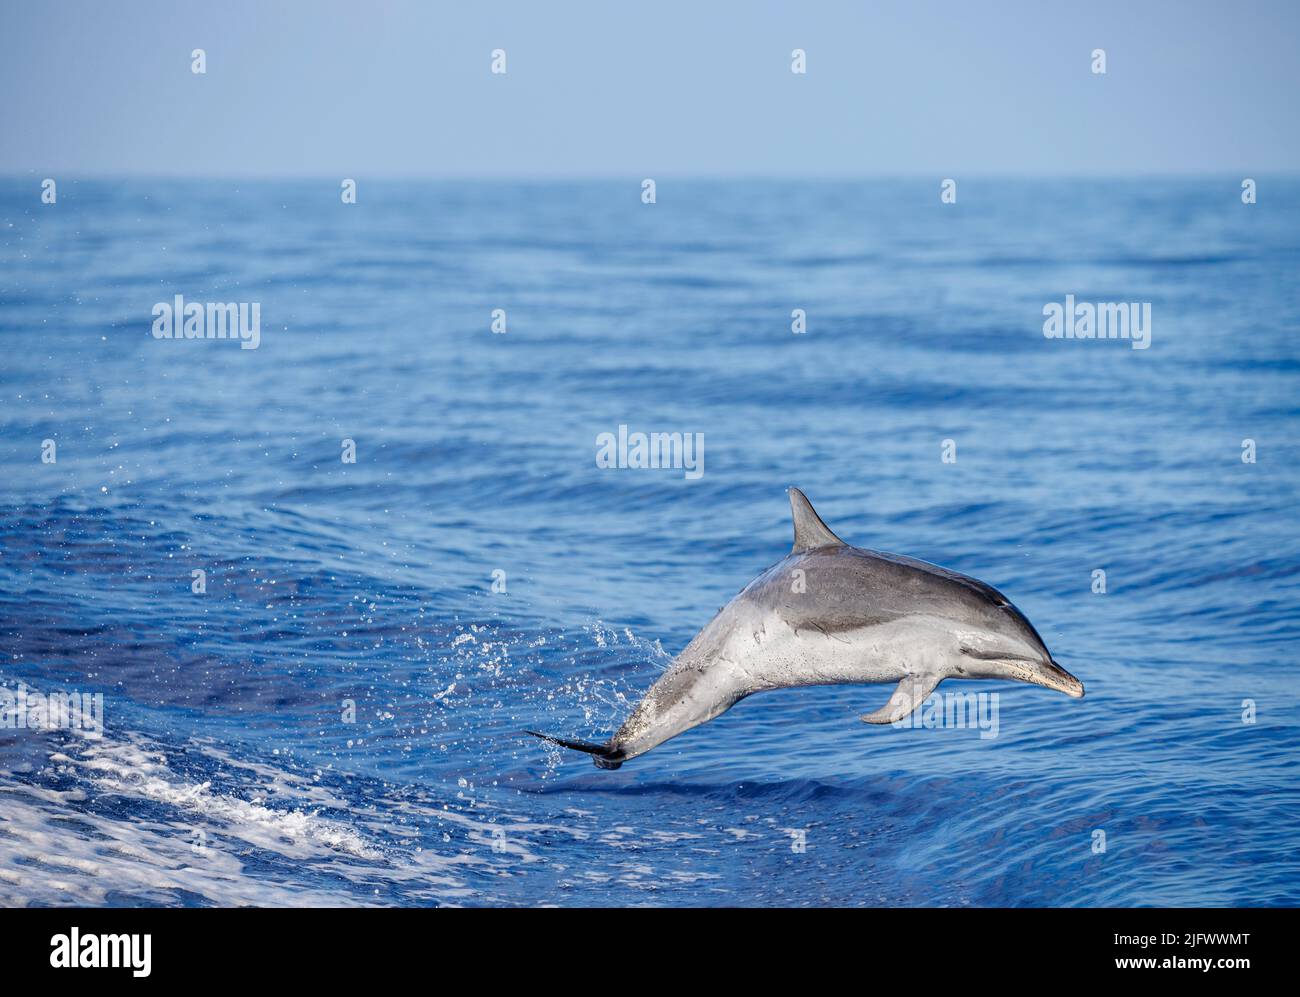 Pantropical spotted dolphins, Stenella attenuata, leaps out of the open ocean off the Big Island, Hawaii, Pacific Ocean, United States. Stock Photo